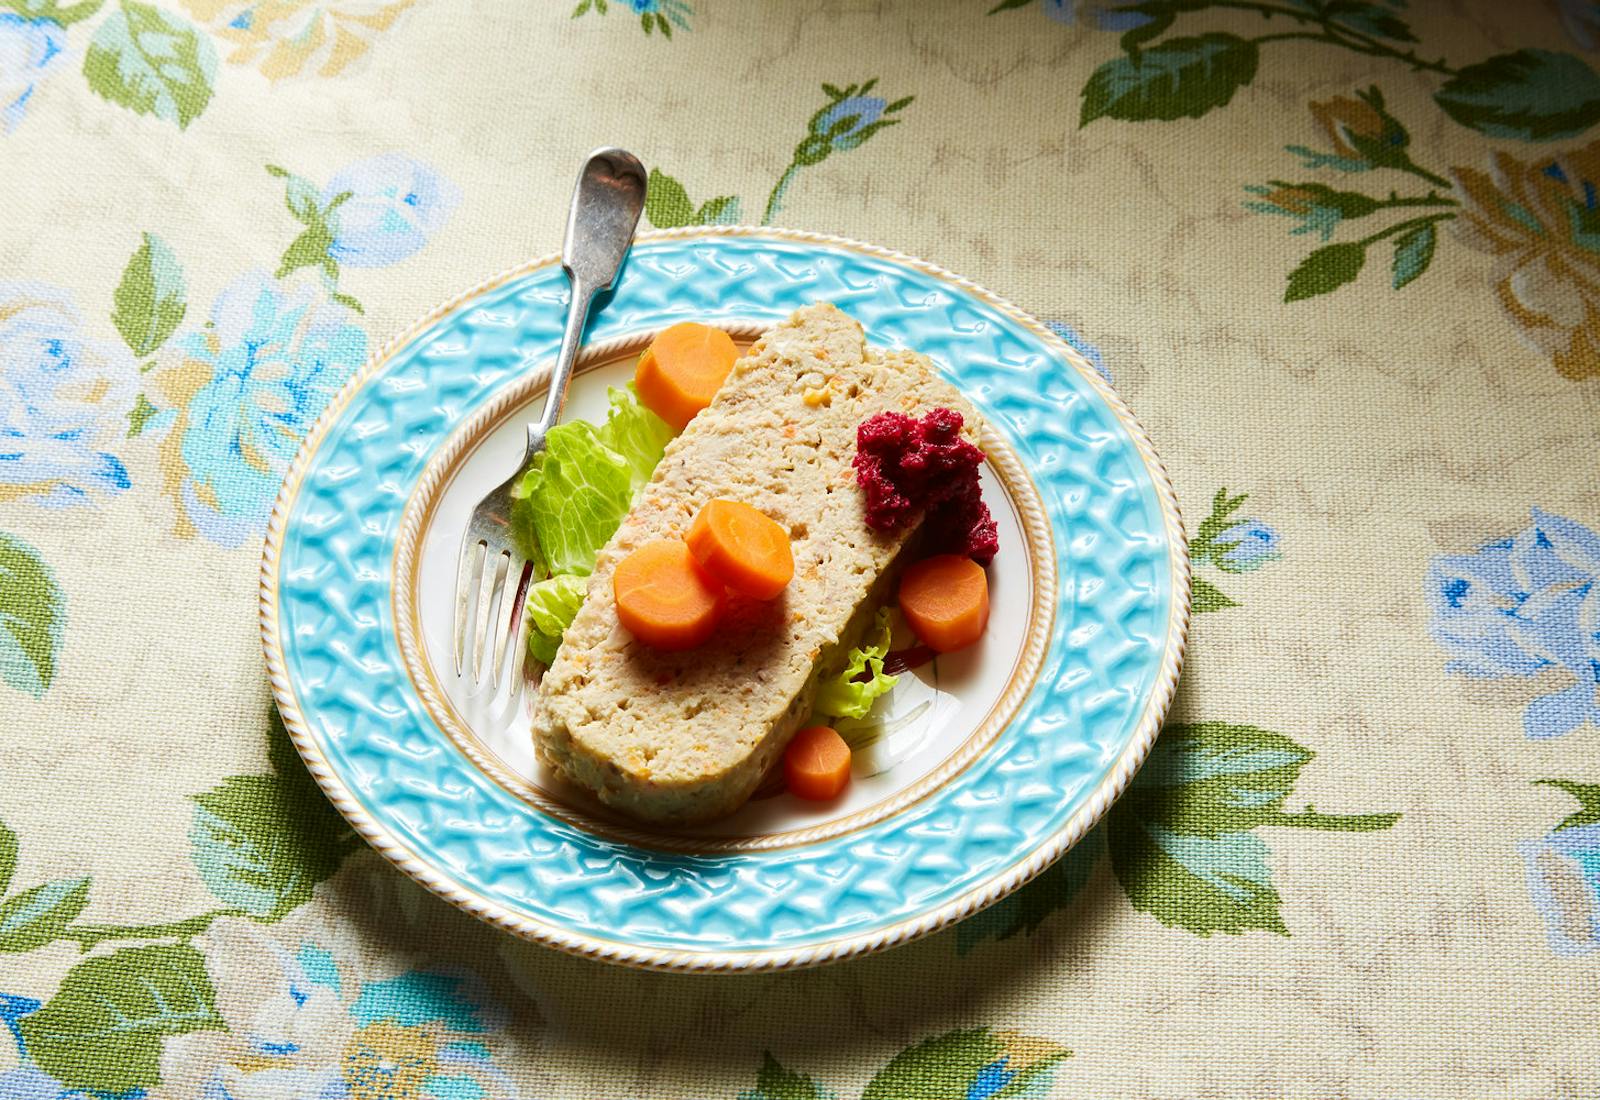 Slice of gefilte fish with carrots, beet horseradish and lettuce on blue plate atop floral tablecloth.